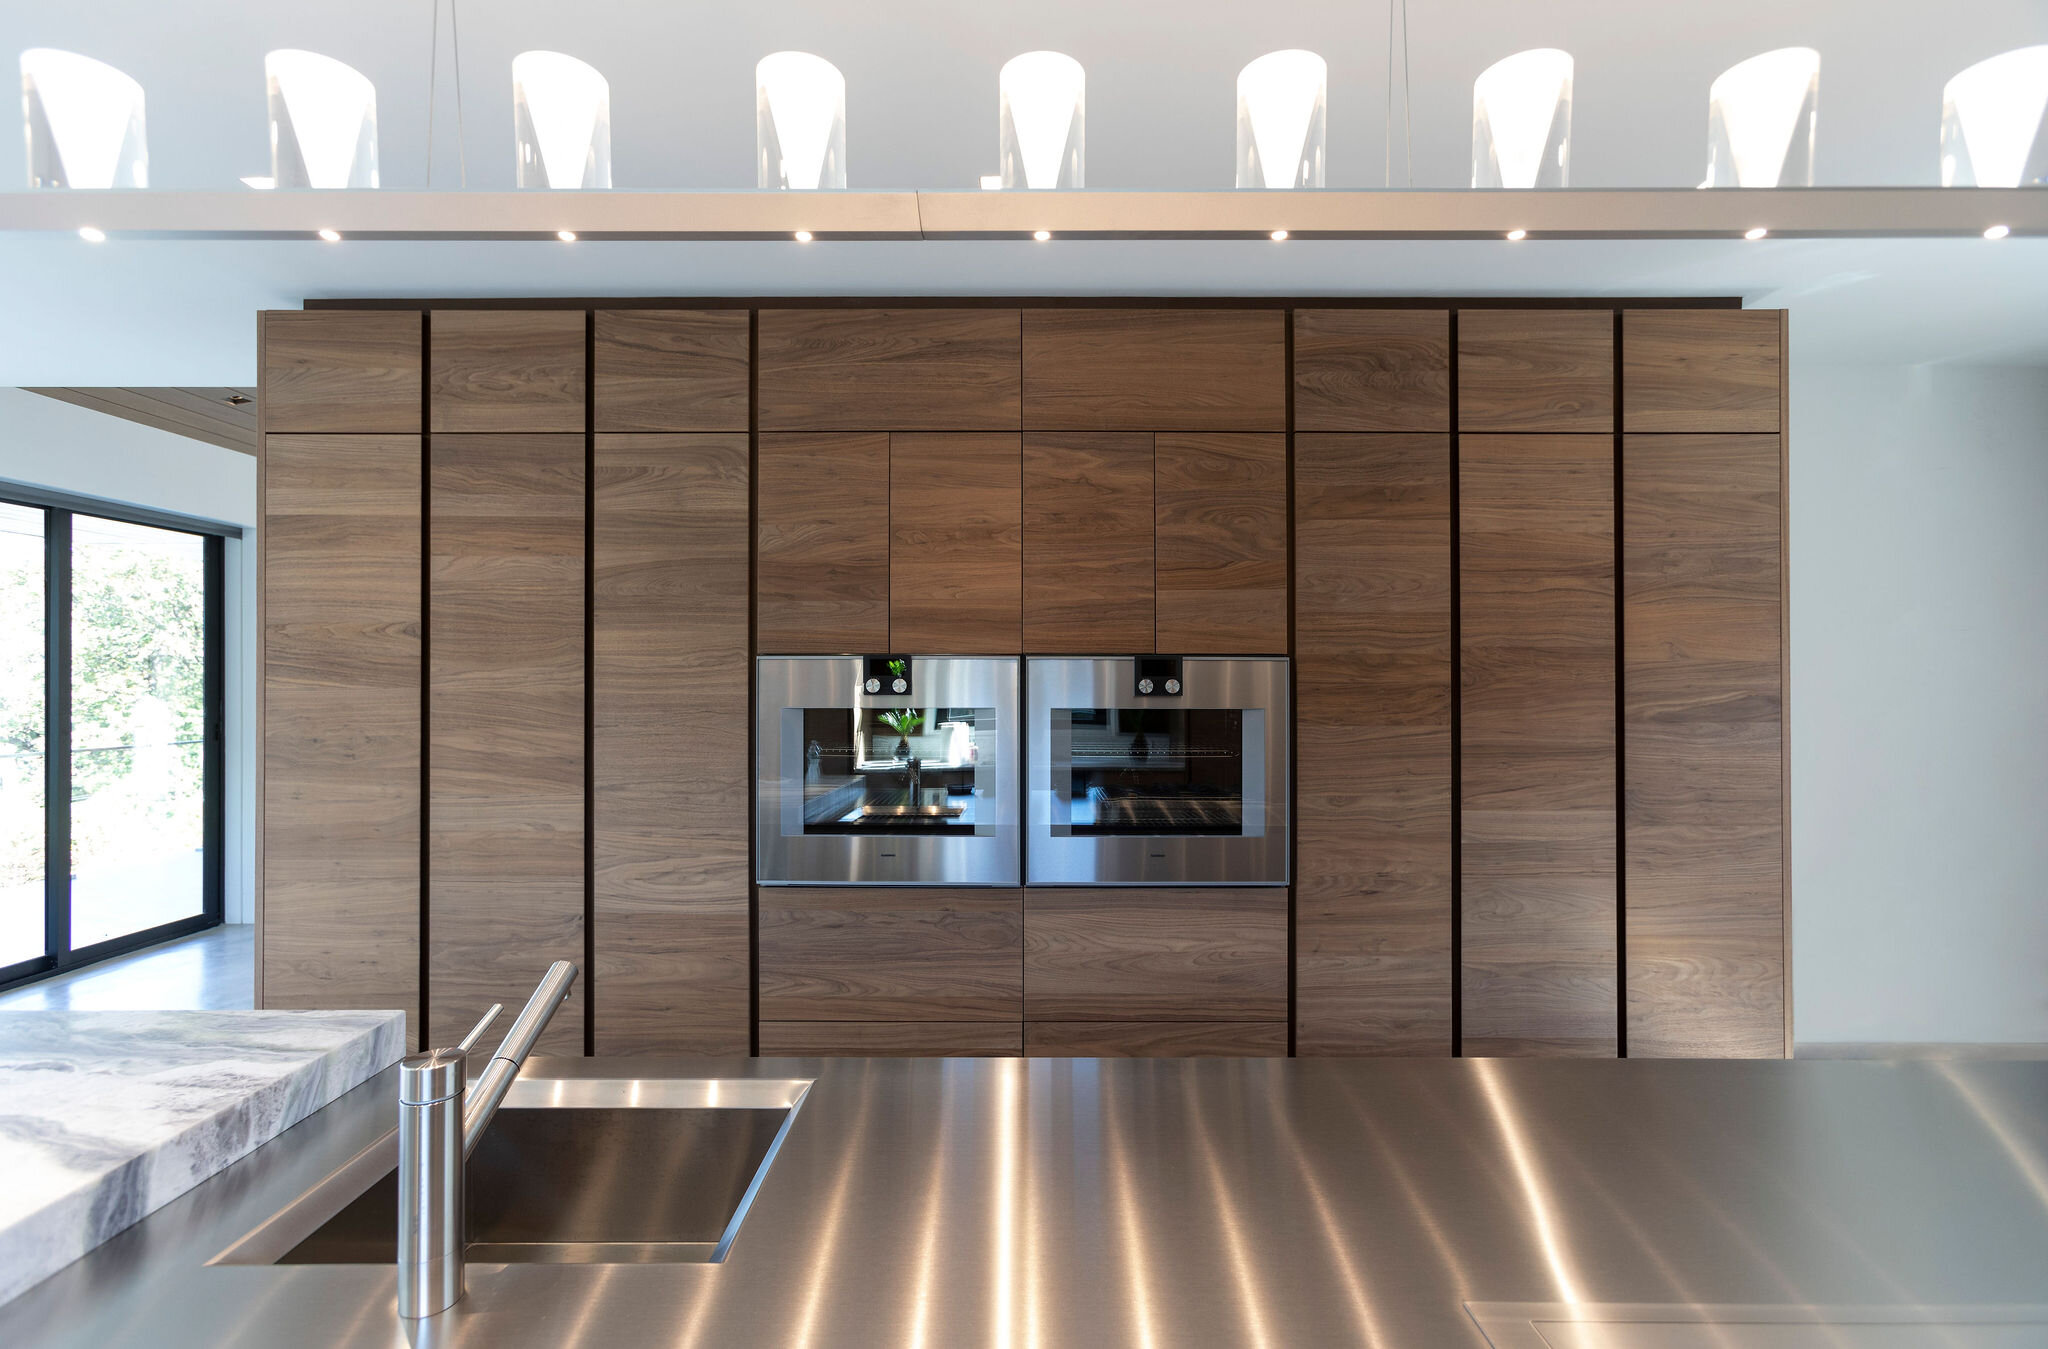  Wall ovens are flanked by hand-planed walnut cabinets that light up all interior shelves. The suspension lights over the island mimic candles when lit in the evening. 